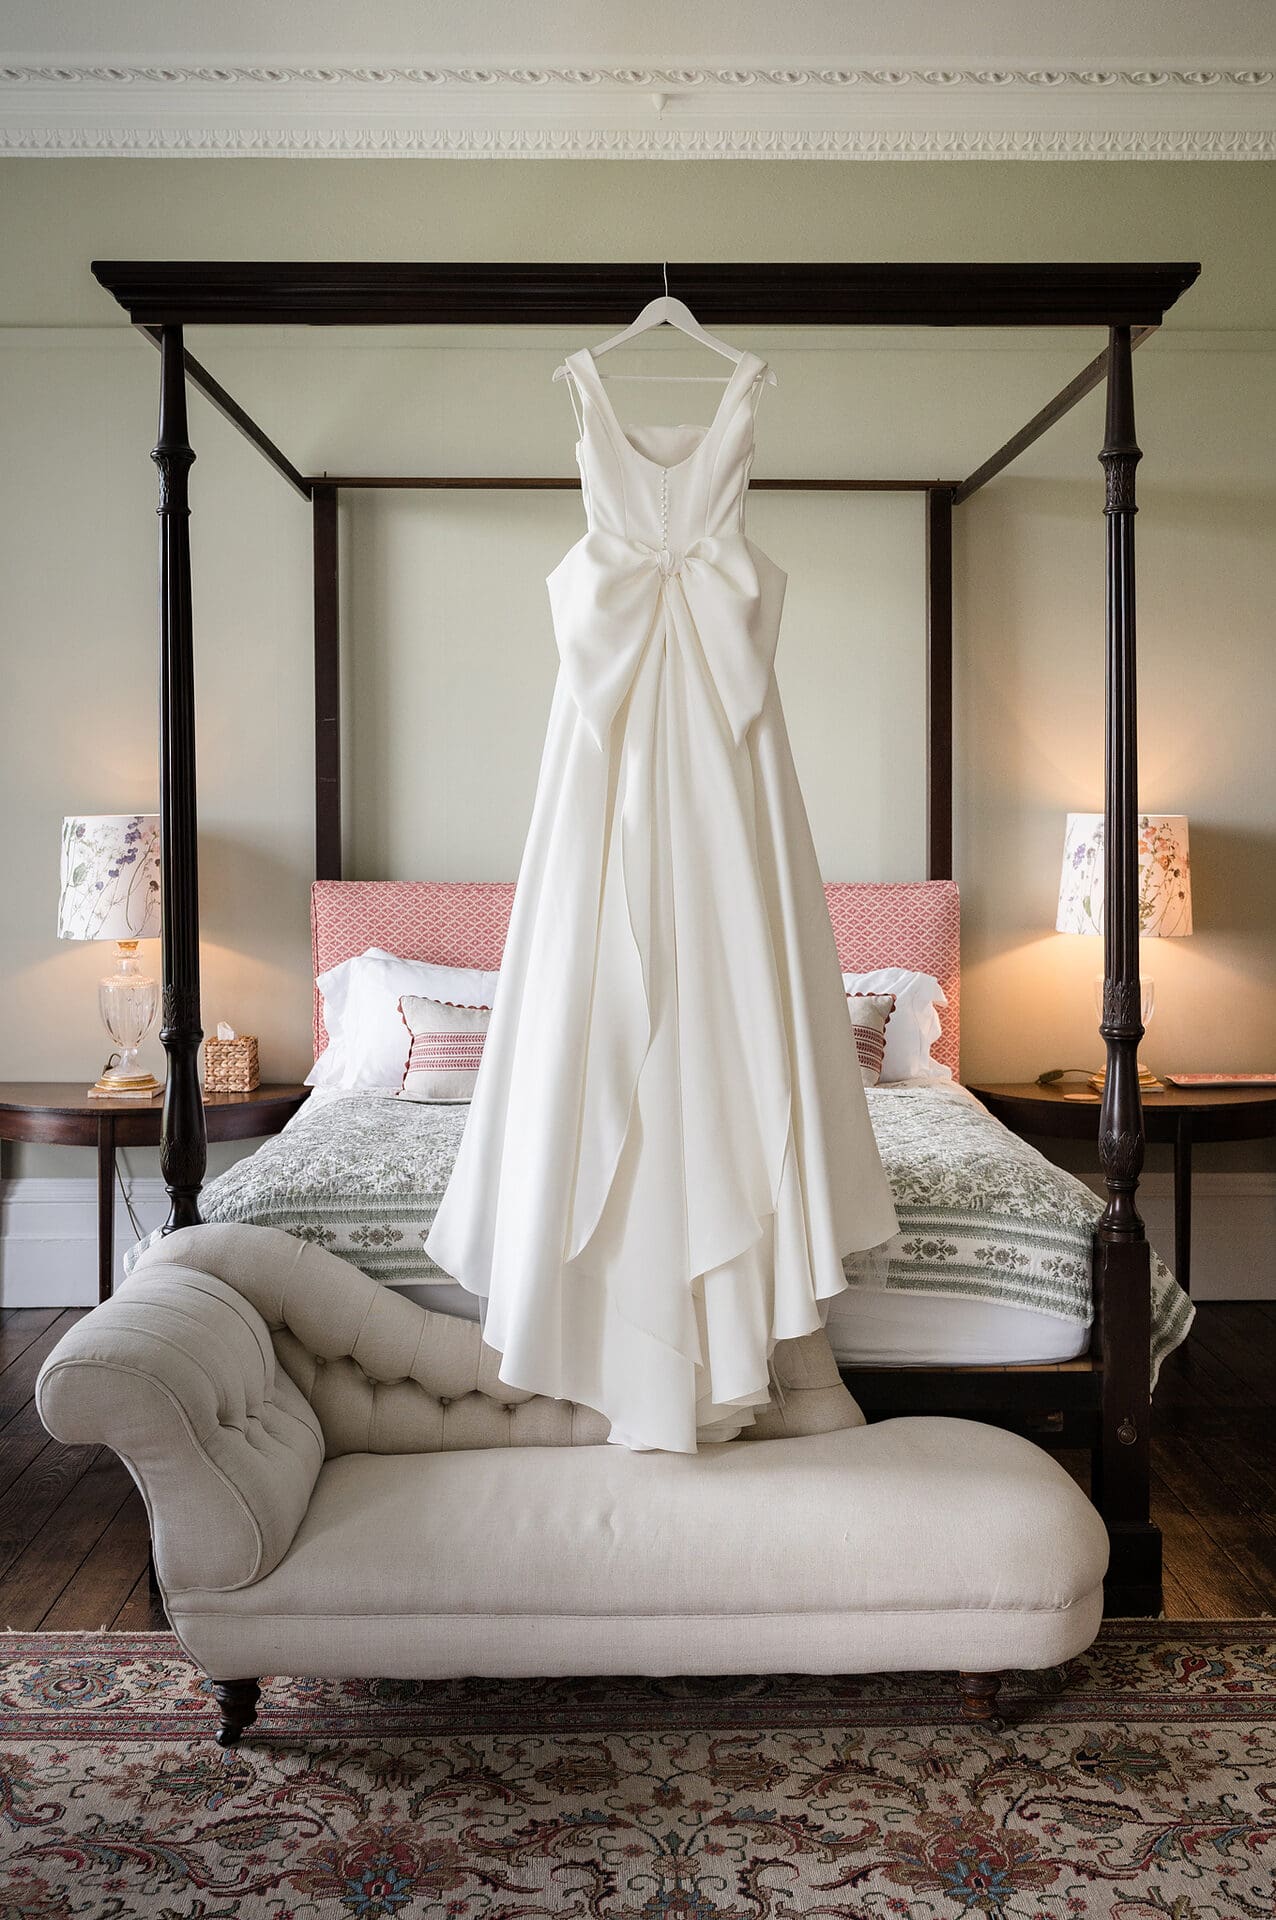 A wedding dress hanging on the end of an antique four-poster bed